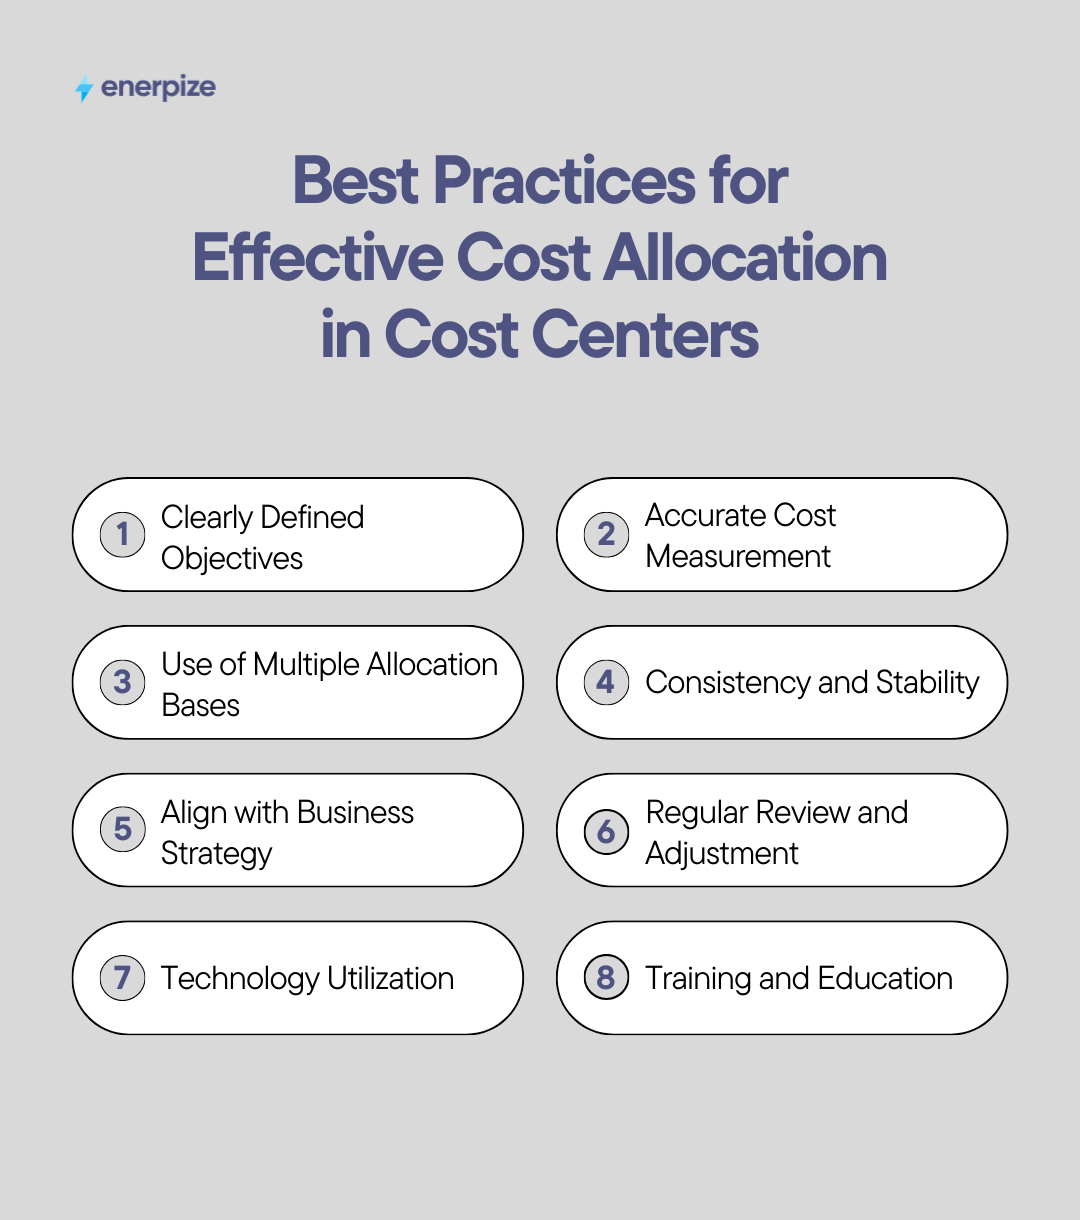 Best Practices for Effective Cost Allocation in Cost Centers